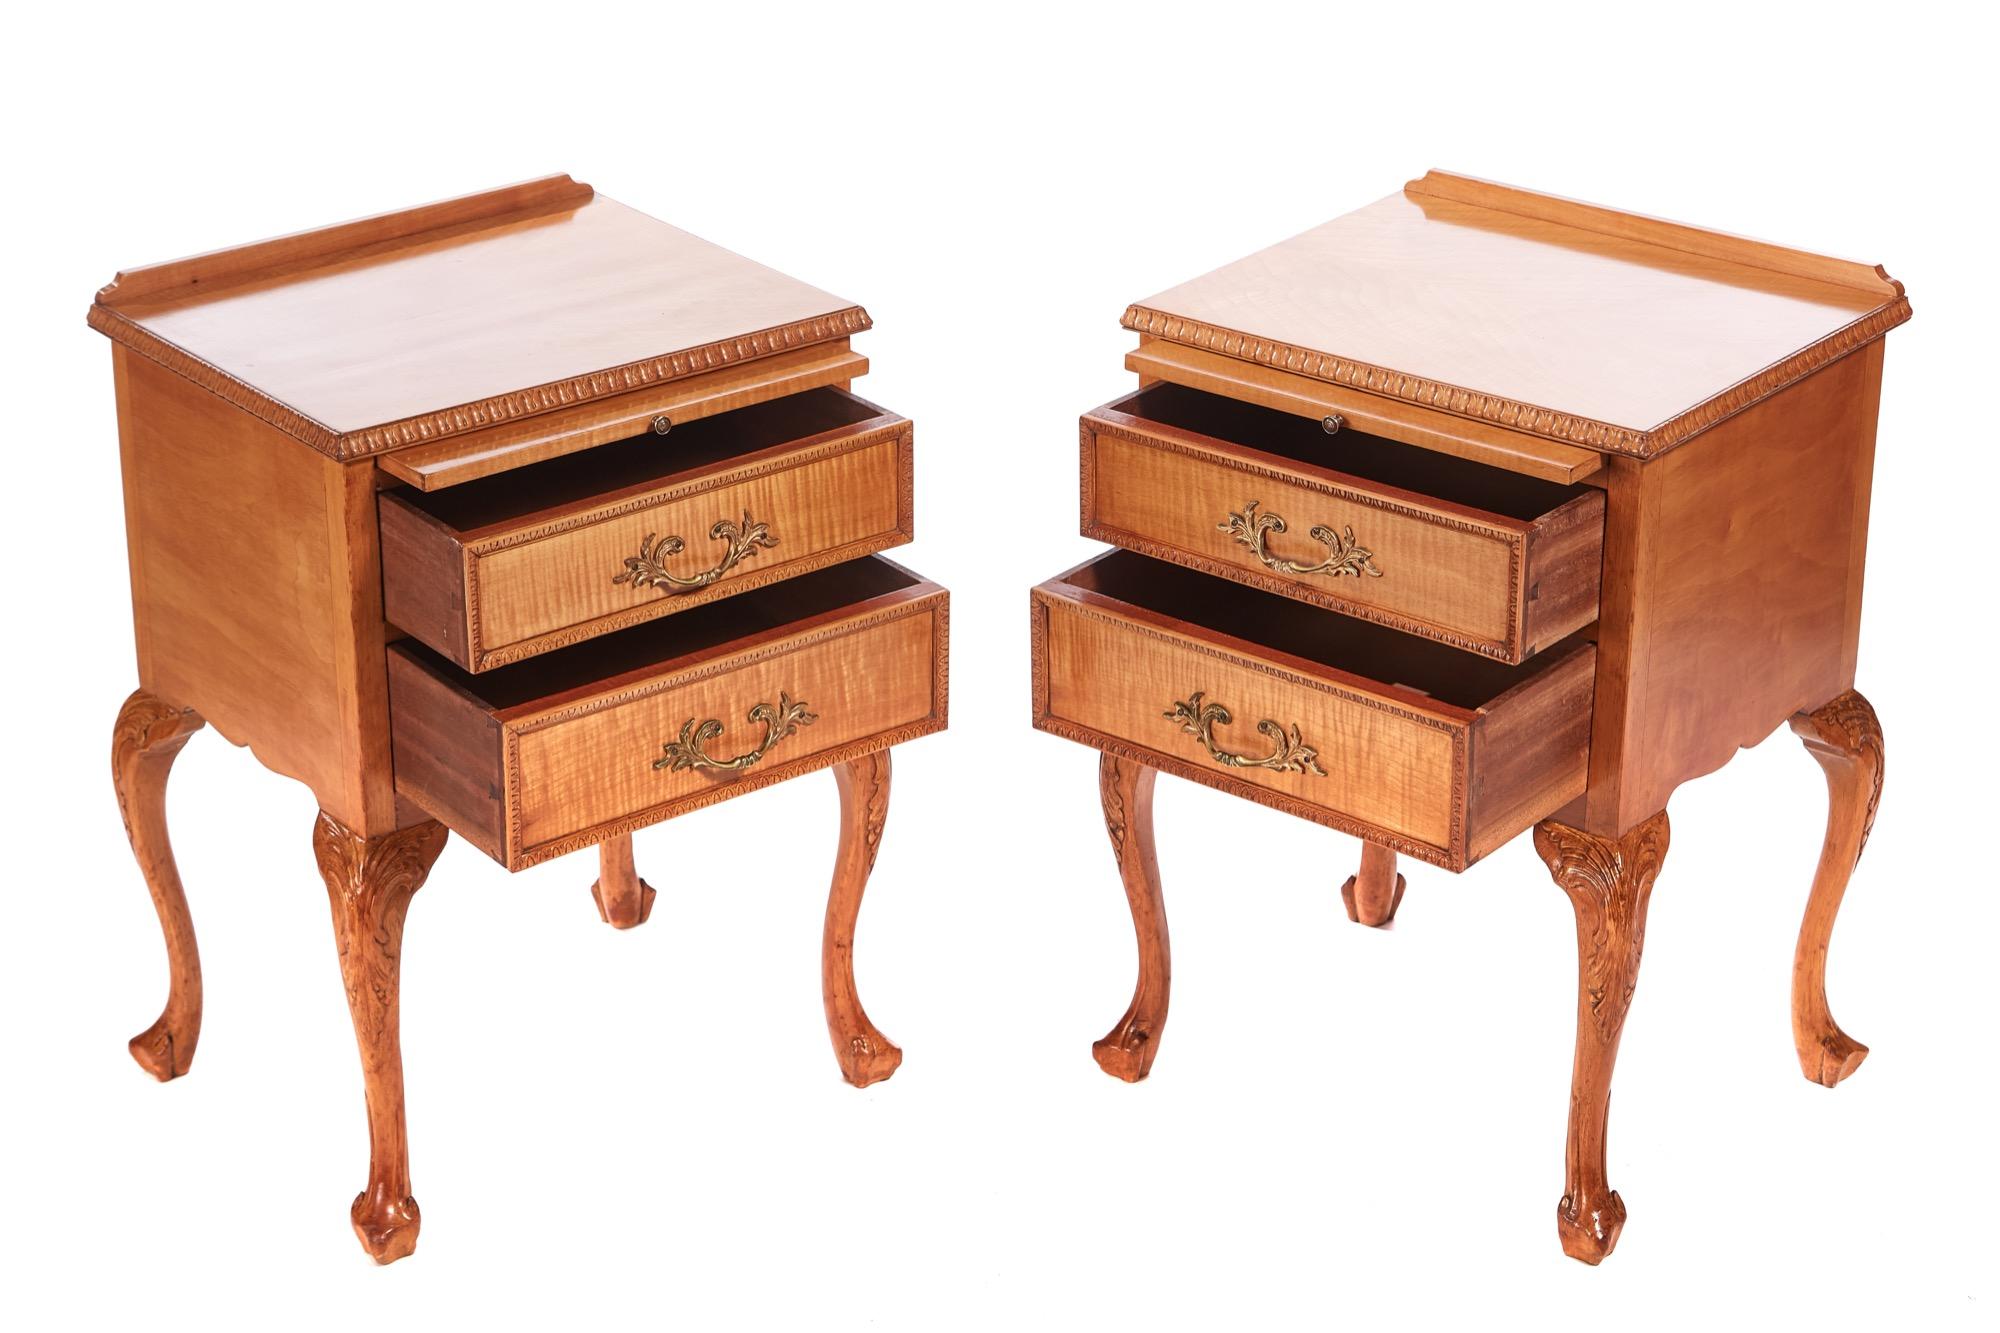 Quality pair of antique maple bedside cabinets having lovely maple tops with a carved edge. Pullout / pull-out slide, 2 maple drawers with original brass handles and carved edge standing on 4 shaped cabriole legs with pad feet and quality carved